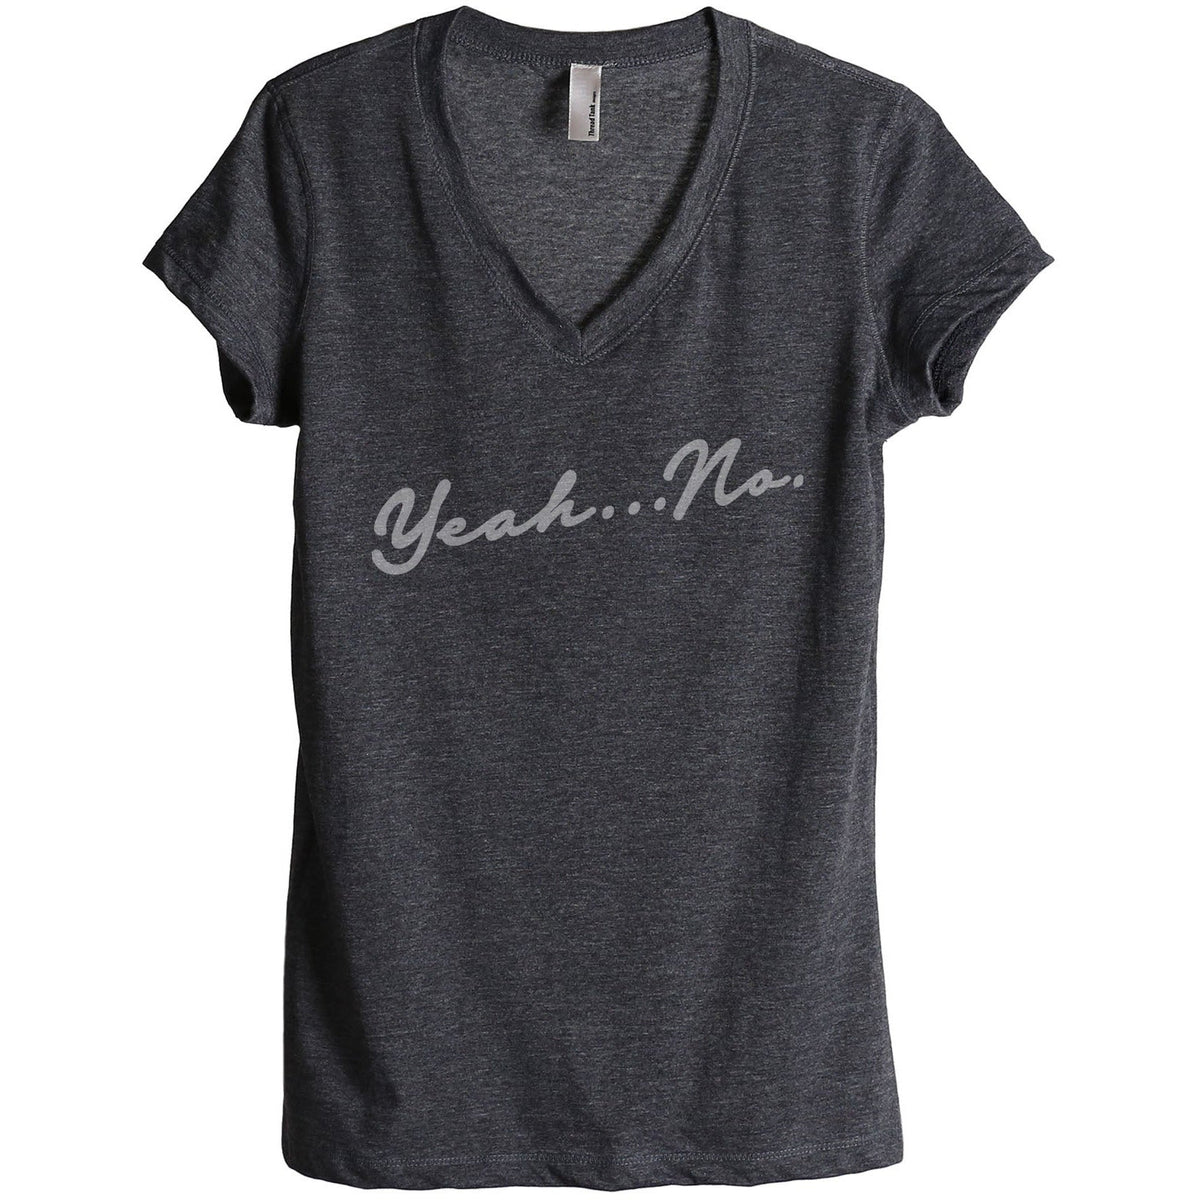 Yeah No Women's Relaxed V-Neck Graphic T-Shirt Top Tee by Thread Tank